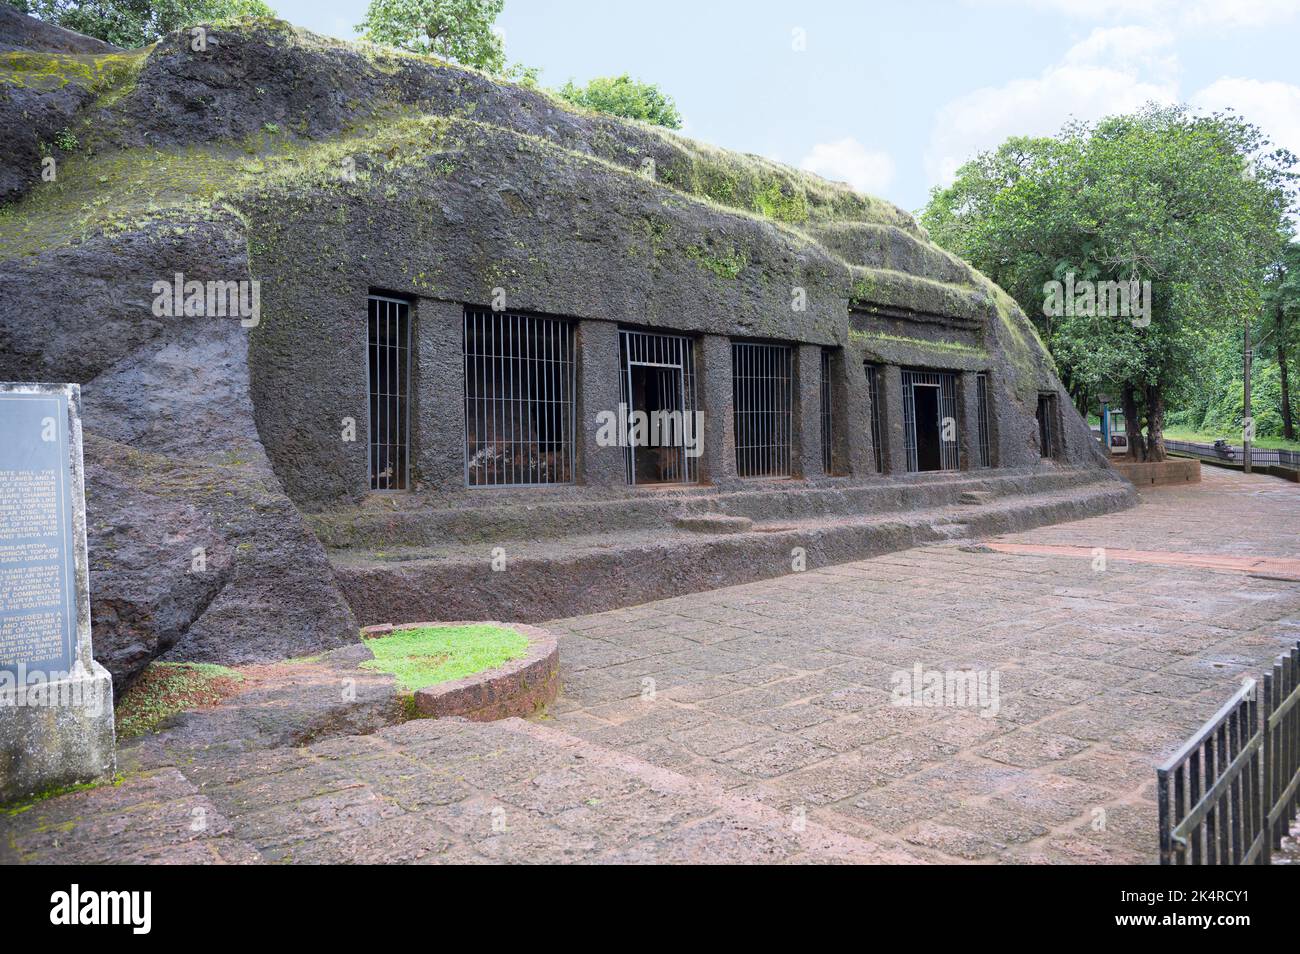 Arvalem Caves, historic cave dwellings thought to have been carved out of rock in the 6th century, Rudreshwar Colony, Sanquelim, Goa, India Stock Photo